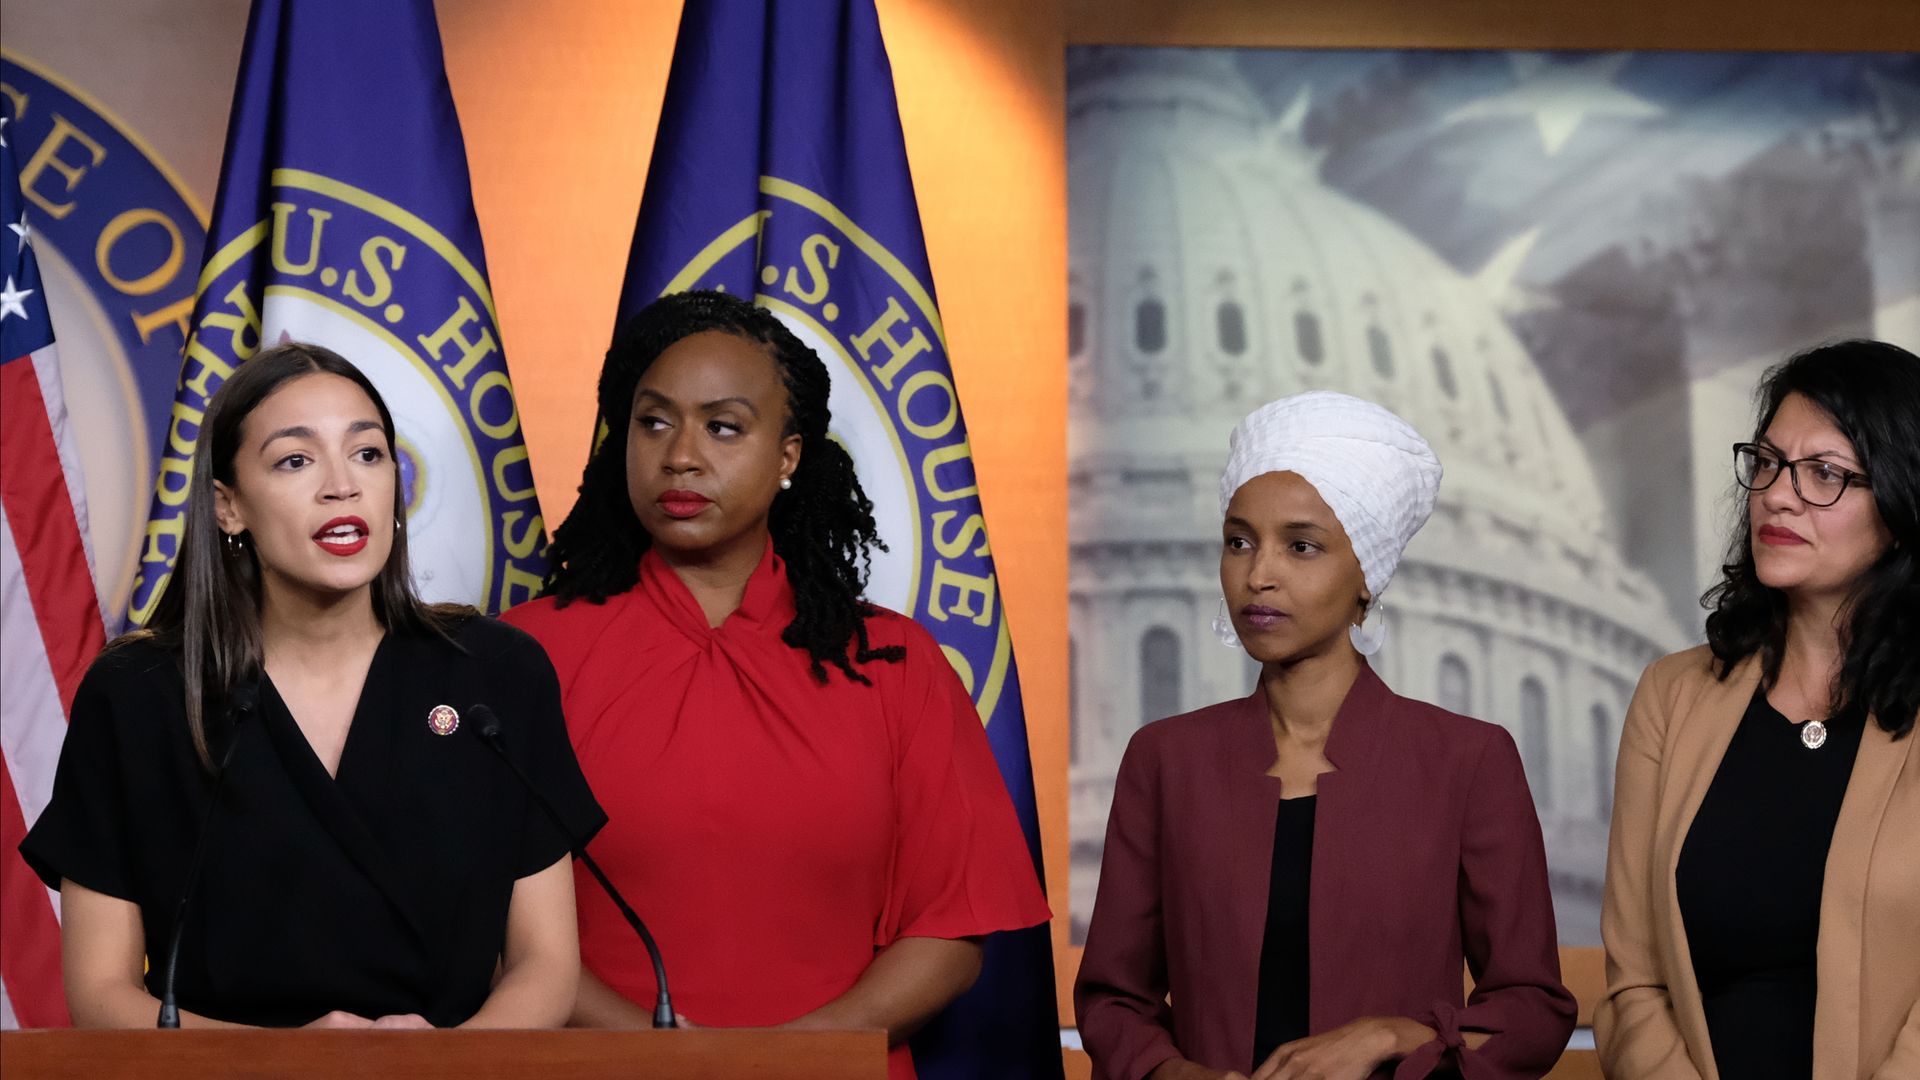 Rep. Alexandria Ocasio-Cortez (D-NY) speaks as Reps. Ayanna Pressley (D-MA), Ilhan Omar (D-MN), and Rashida Tlaib (D-MI) listen during a press conference at the US Capitol on July 15